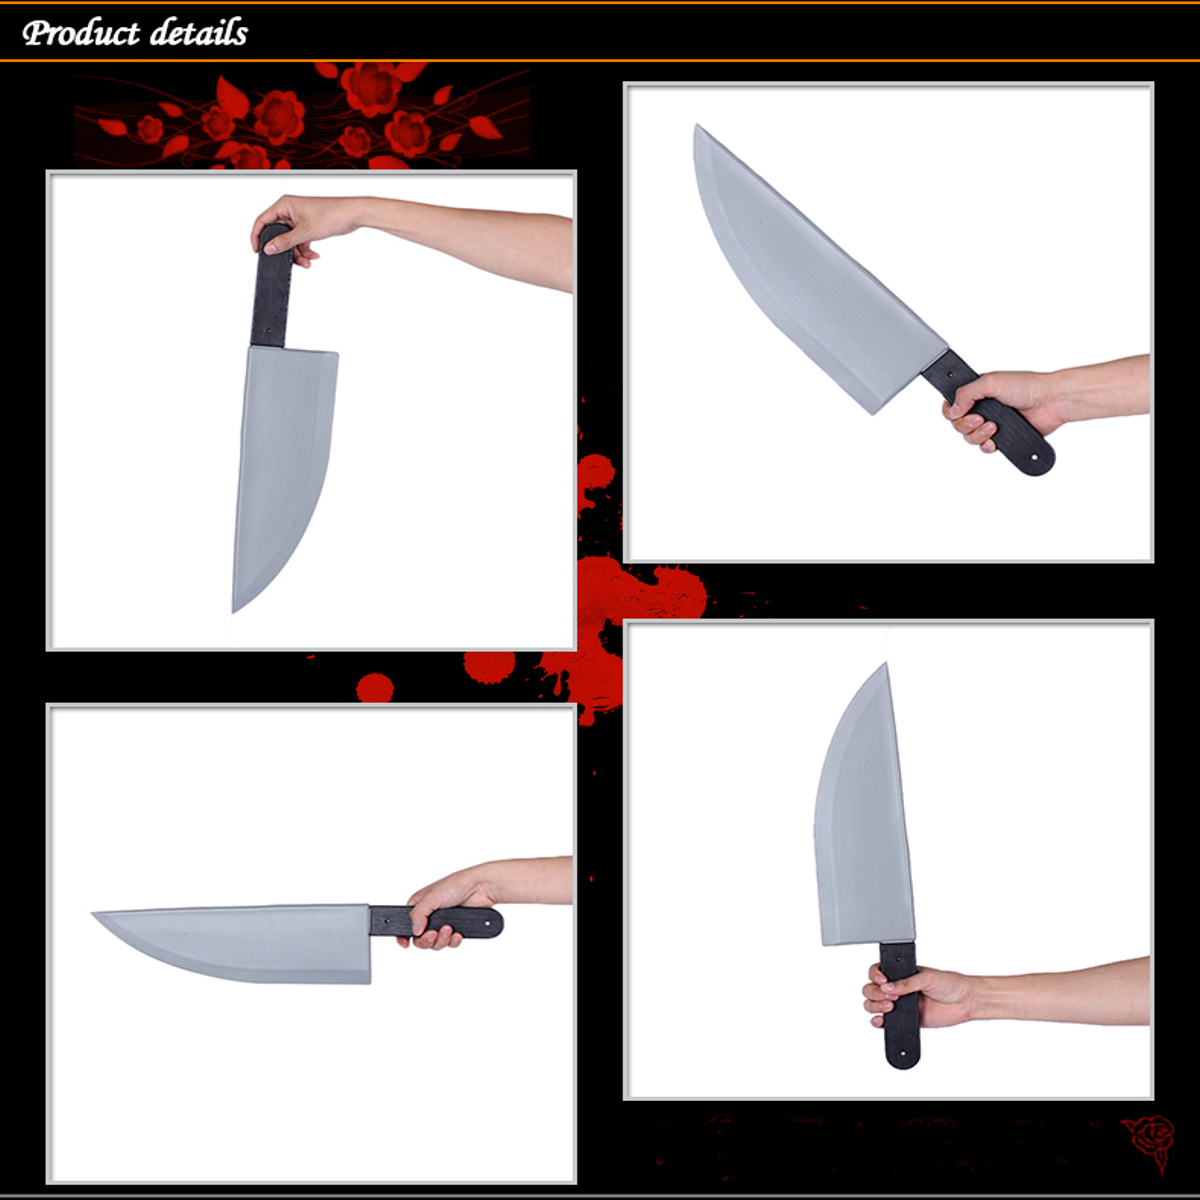 Halloween Weapon Knife Costume Party Scary Prop Decoration